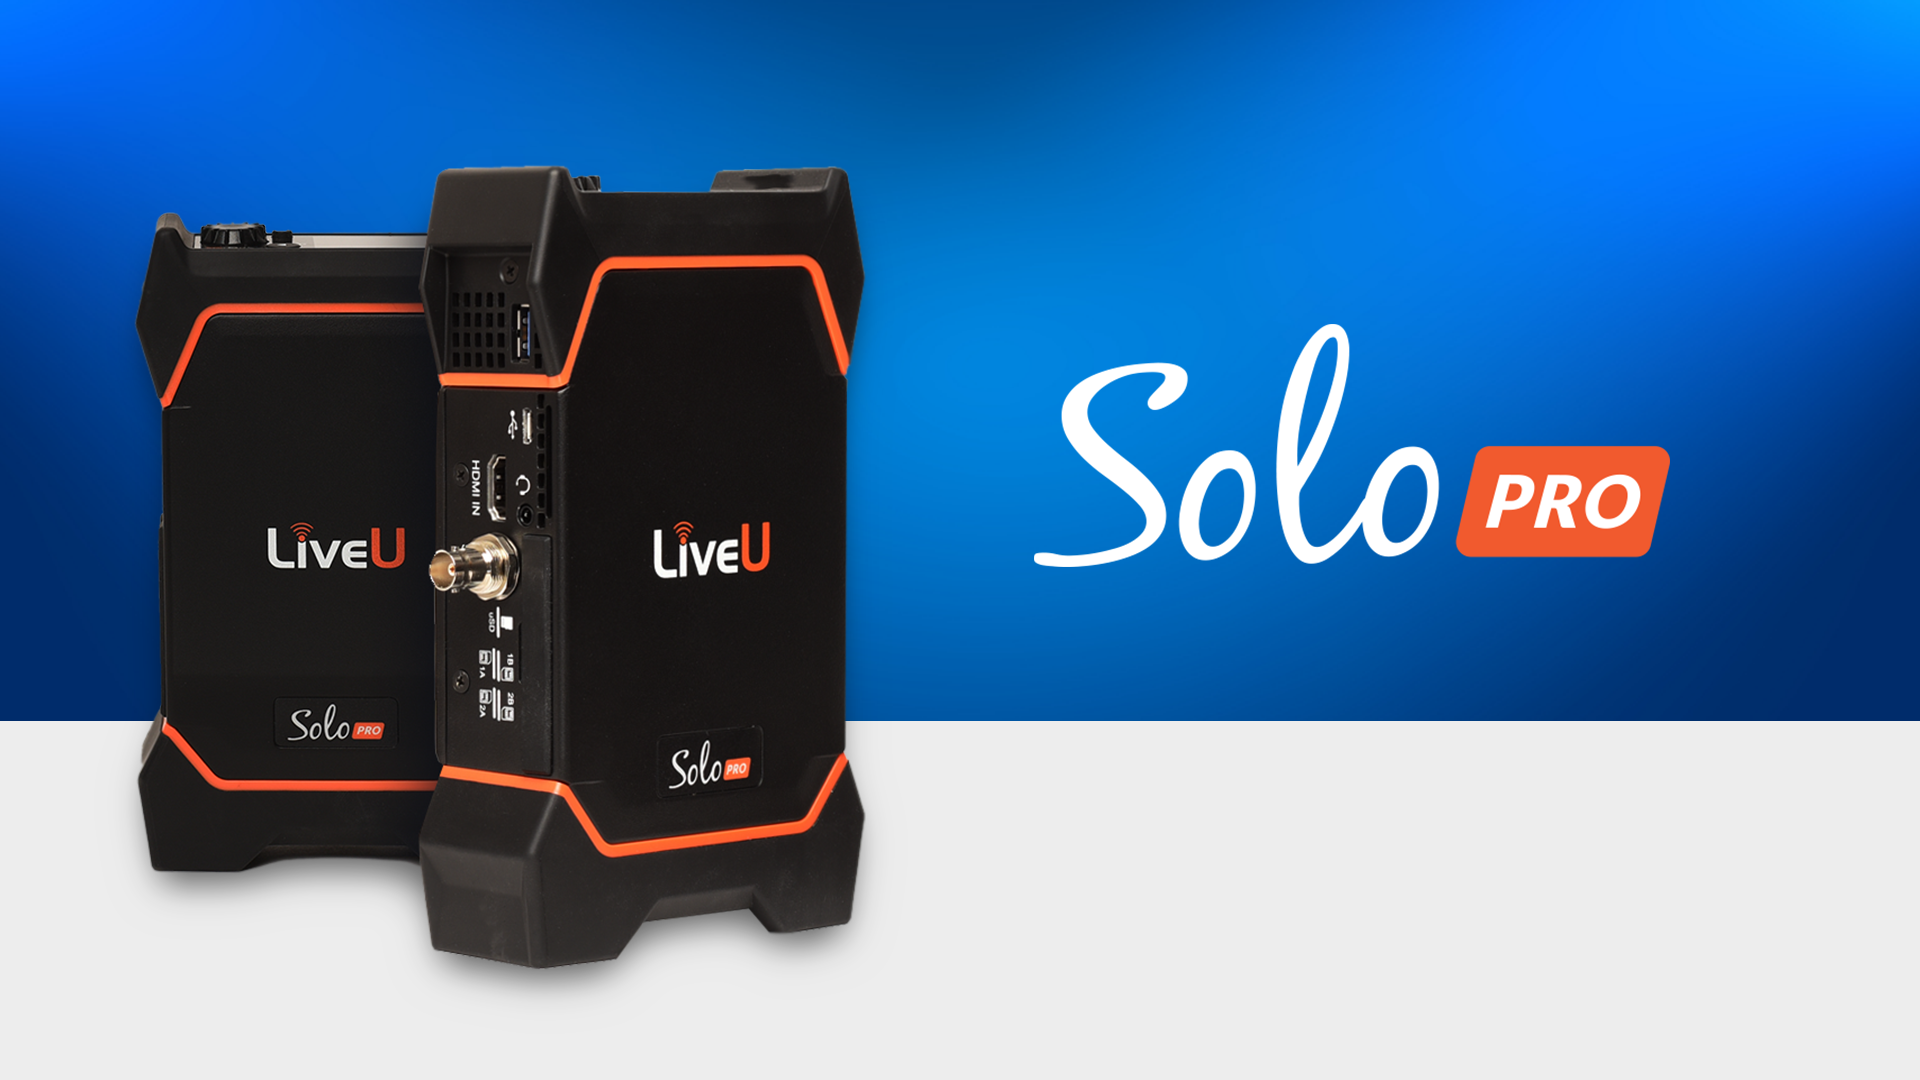 LiveU Releases its Next-Gen Solo PRO Portable Encoder with Future-Proof 4K and HEVC Capabilities